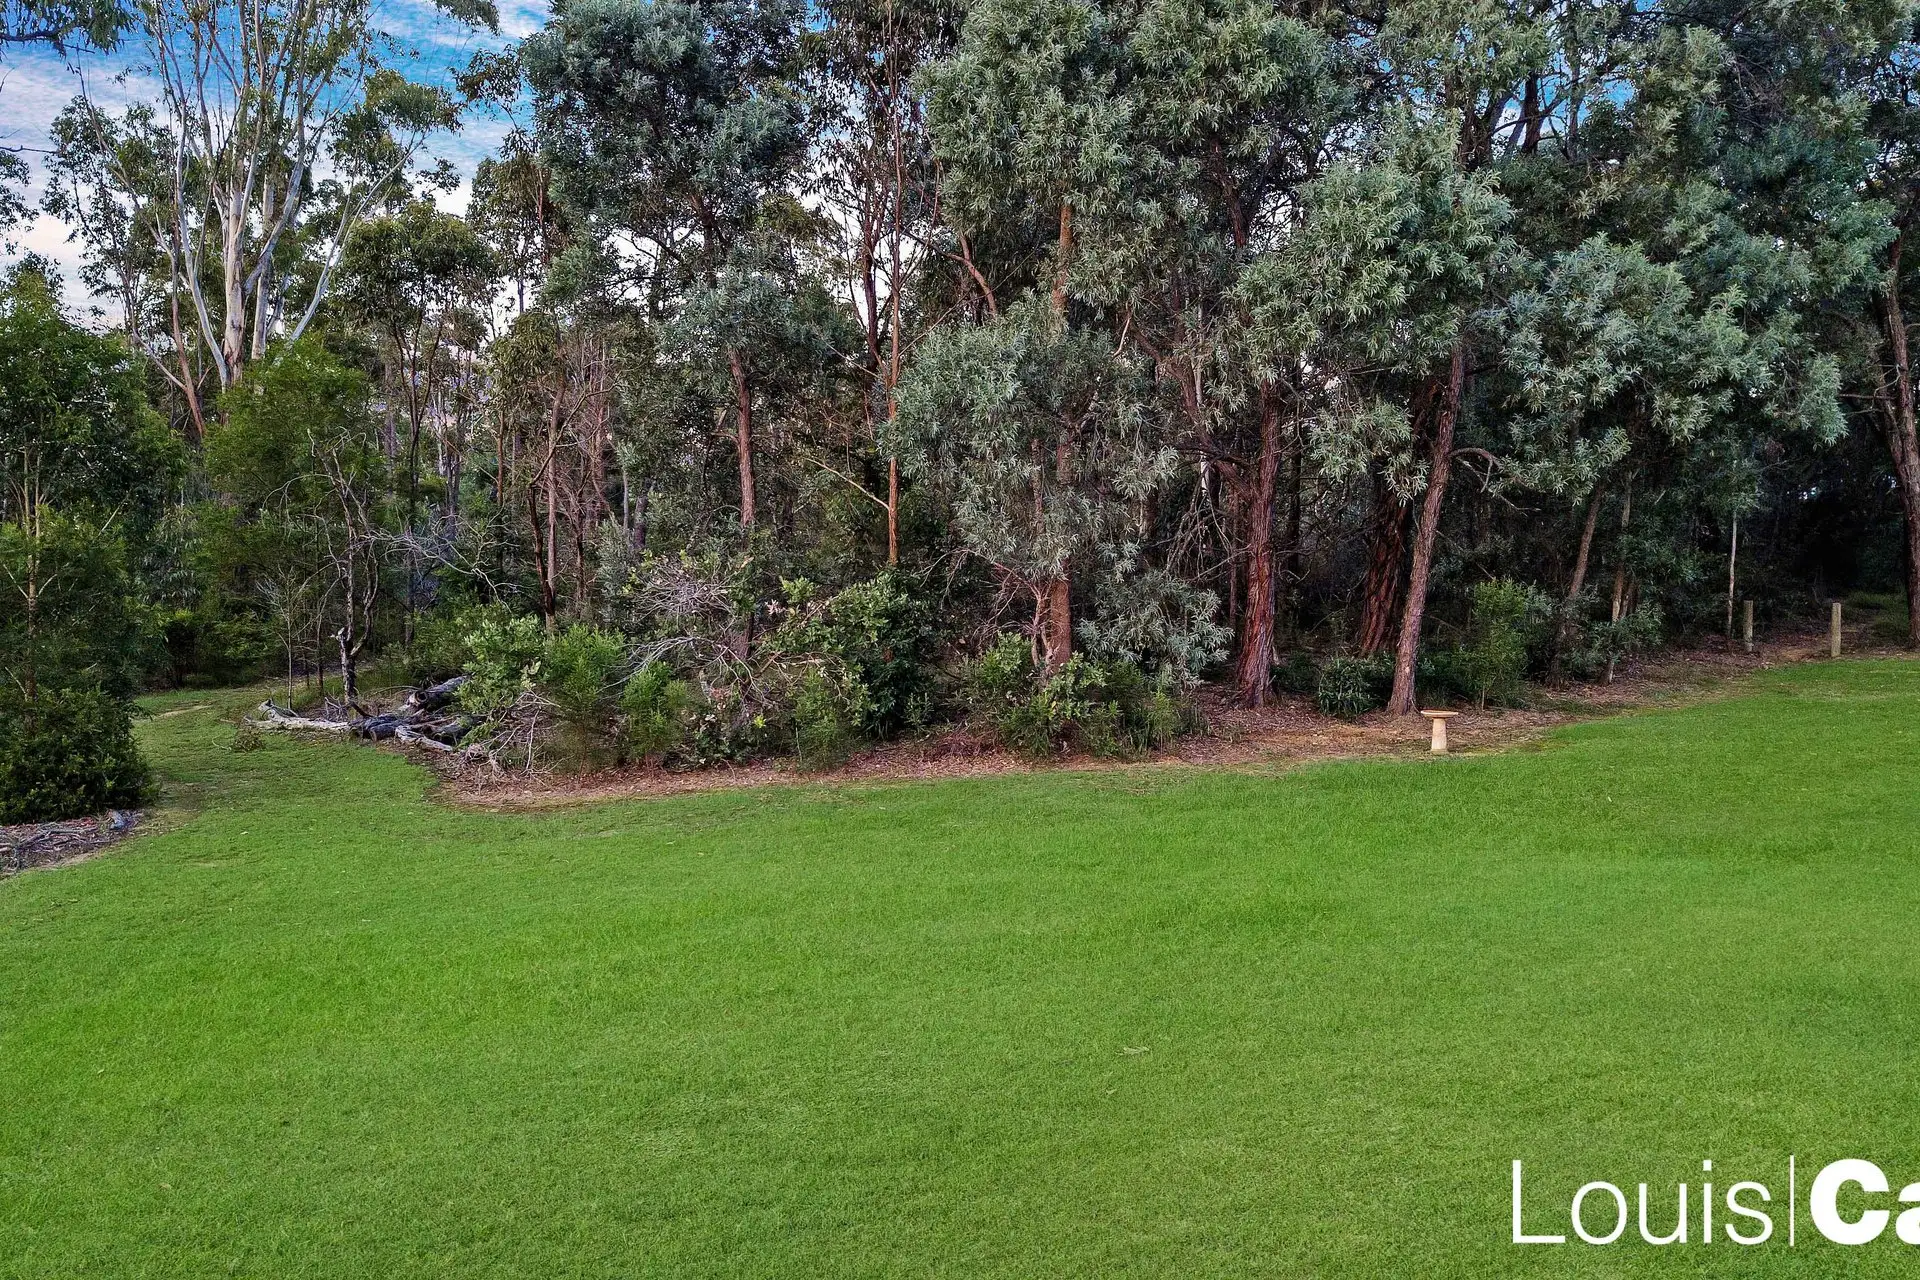 Photo #16: 25 Beacon Avenue, Glenhaven - Sold by Louis Carr Real Estate